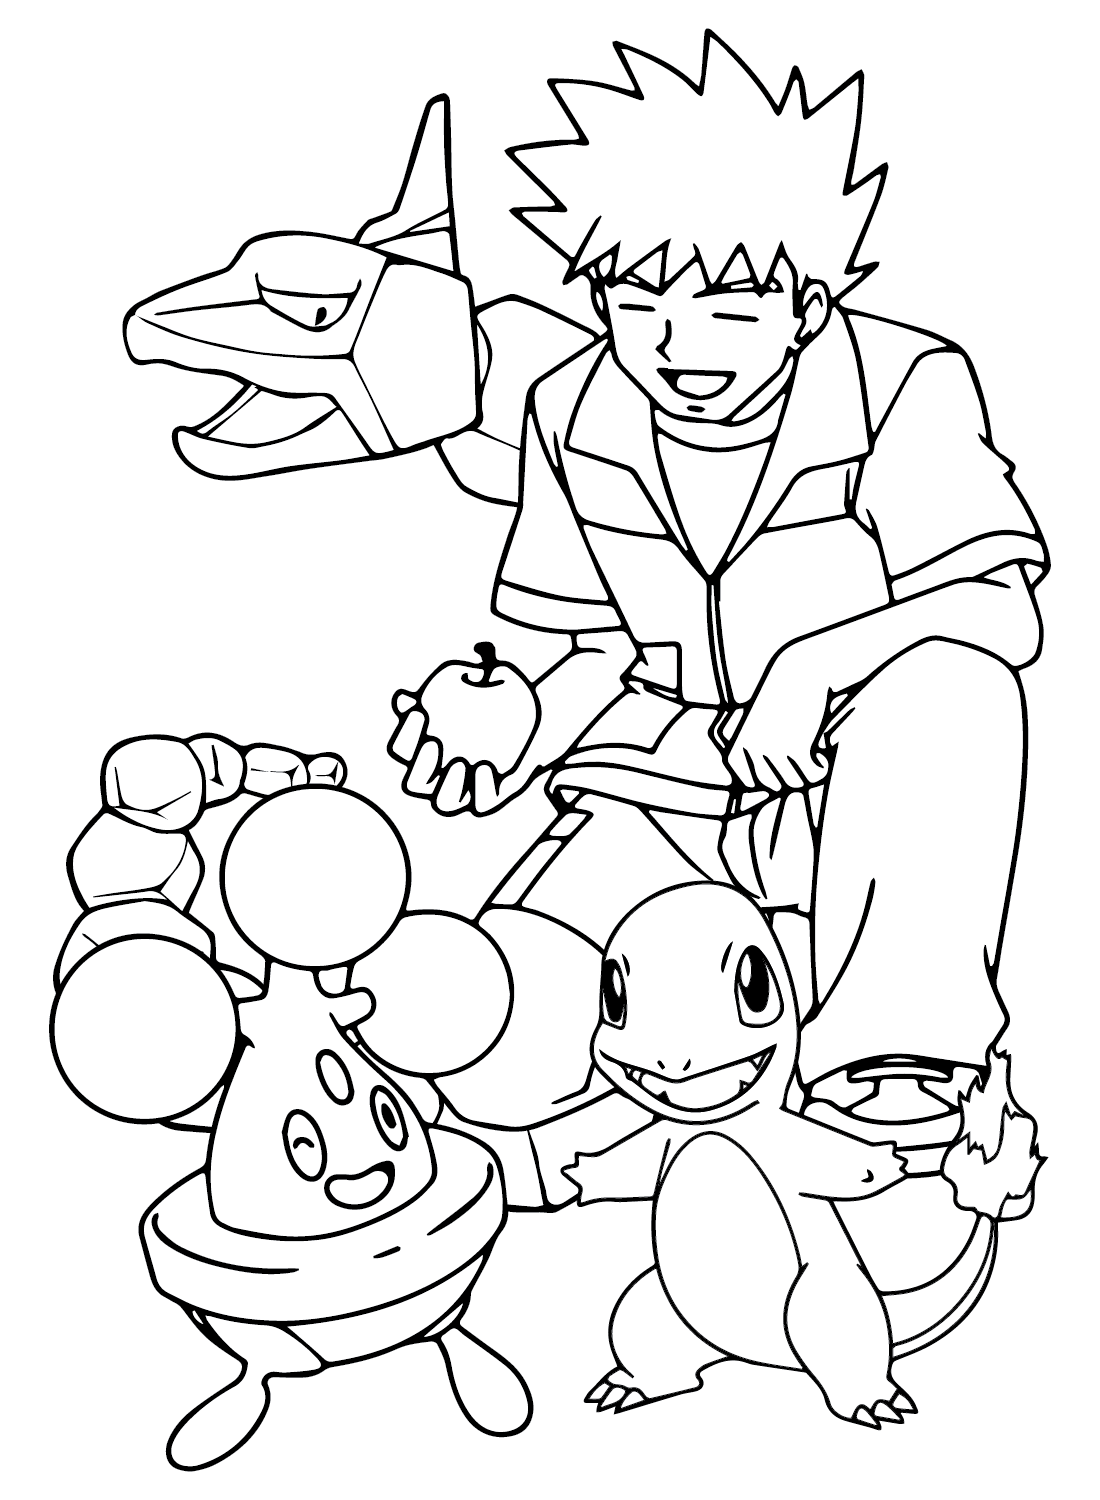 Brock Pokemon Picture to Color from Brock